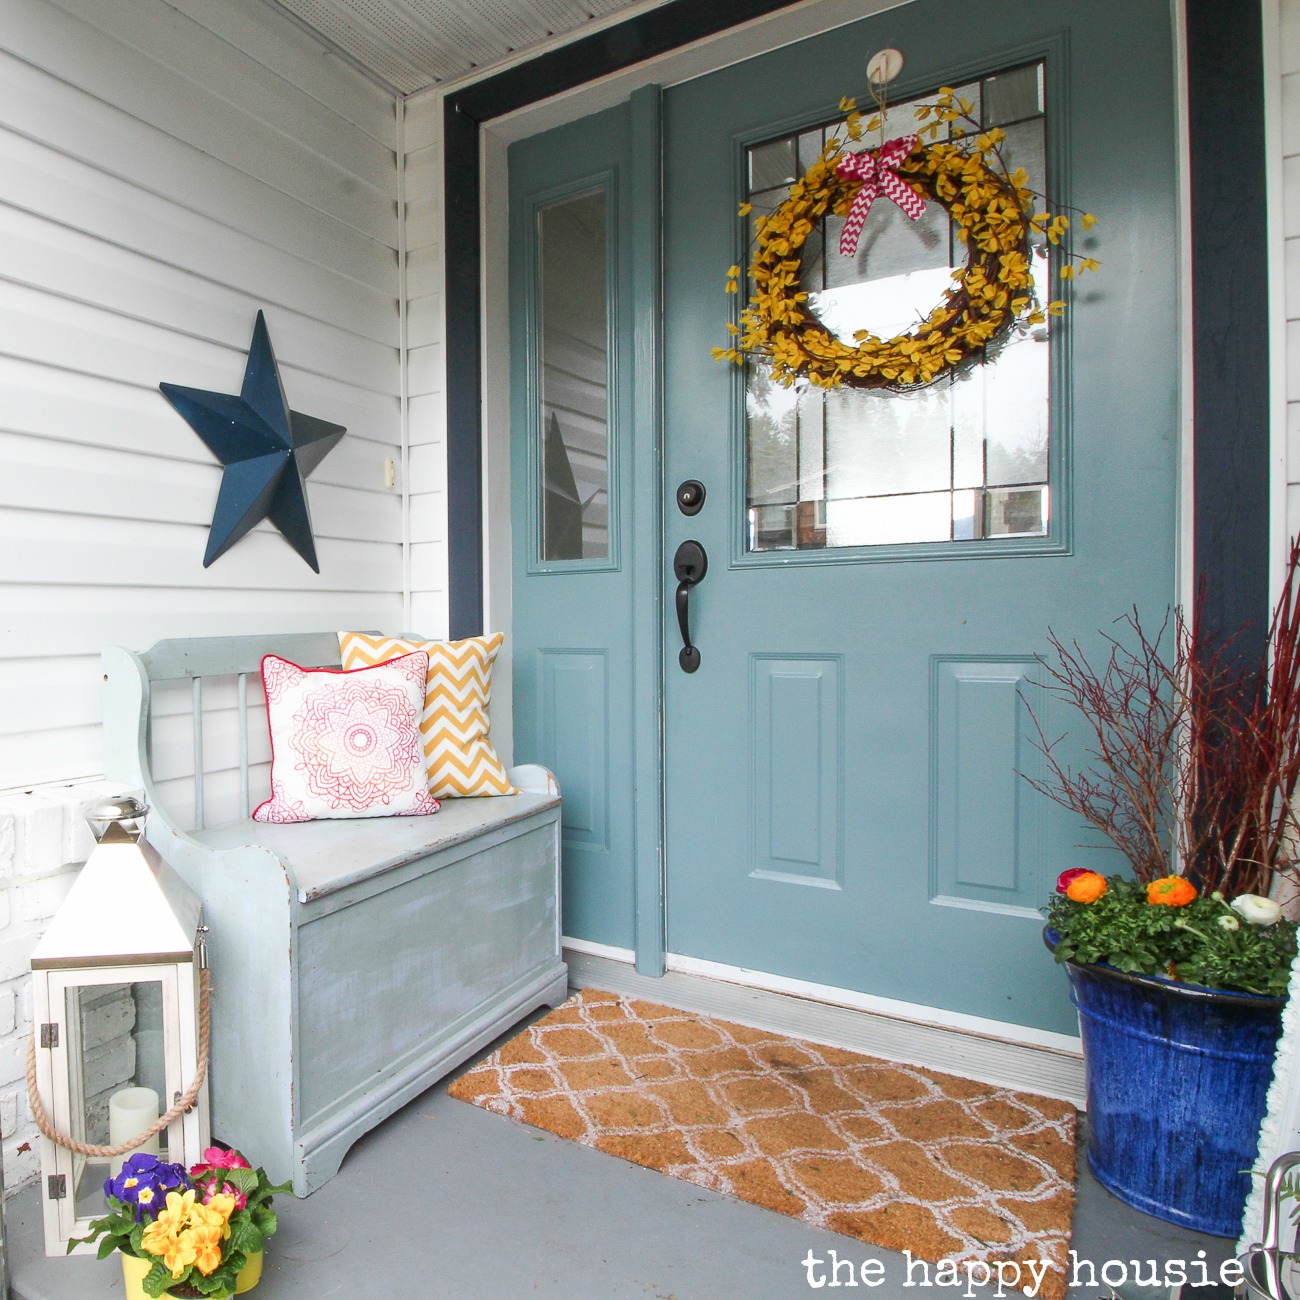 A porch decorated for spring with a wreath on the door.